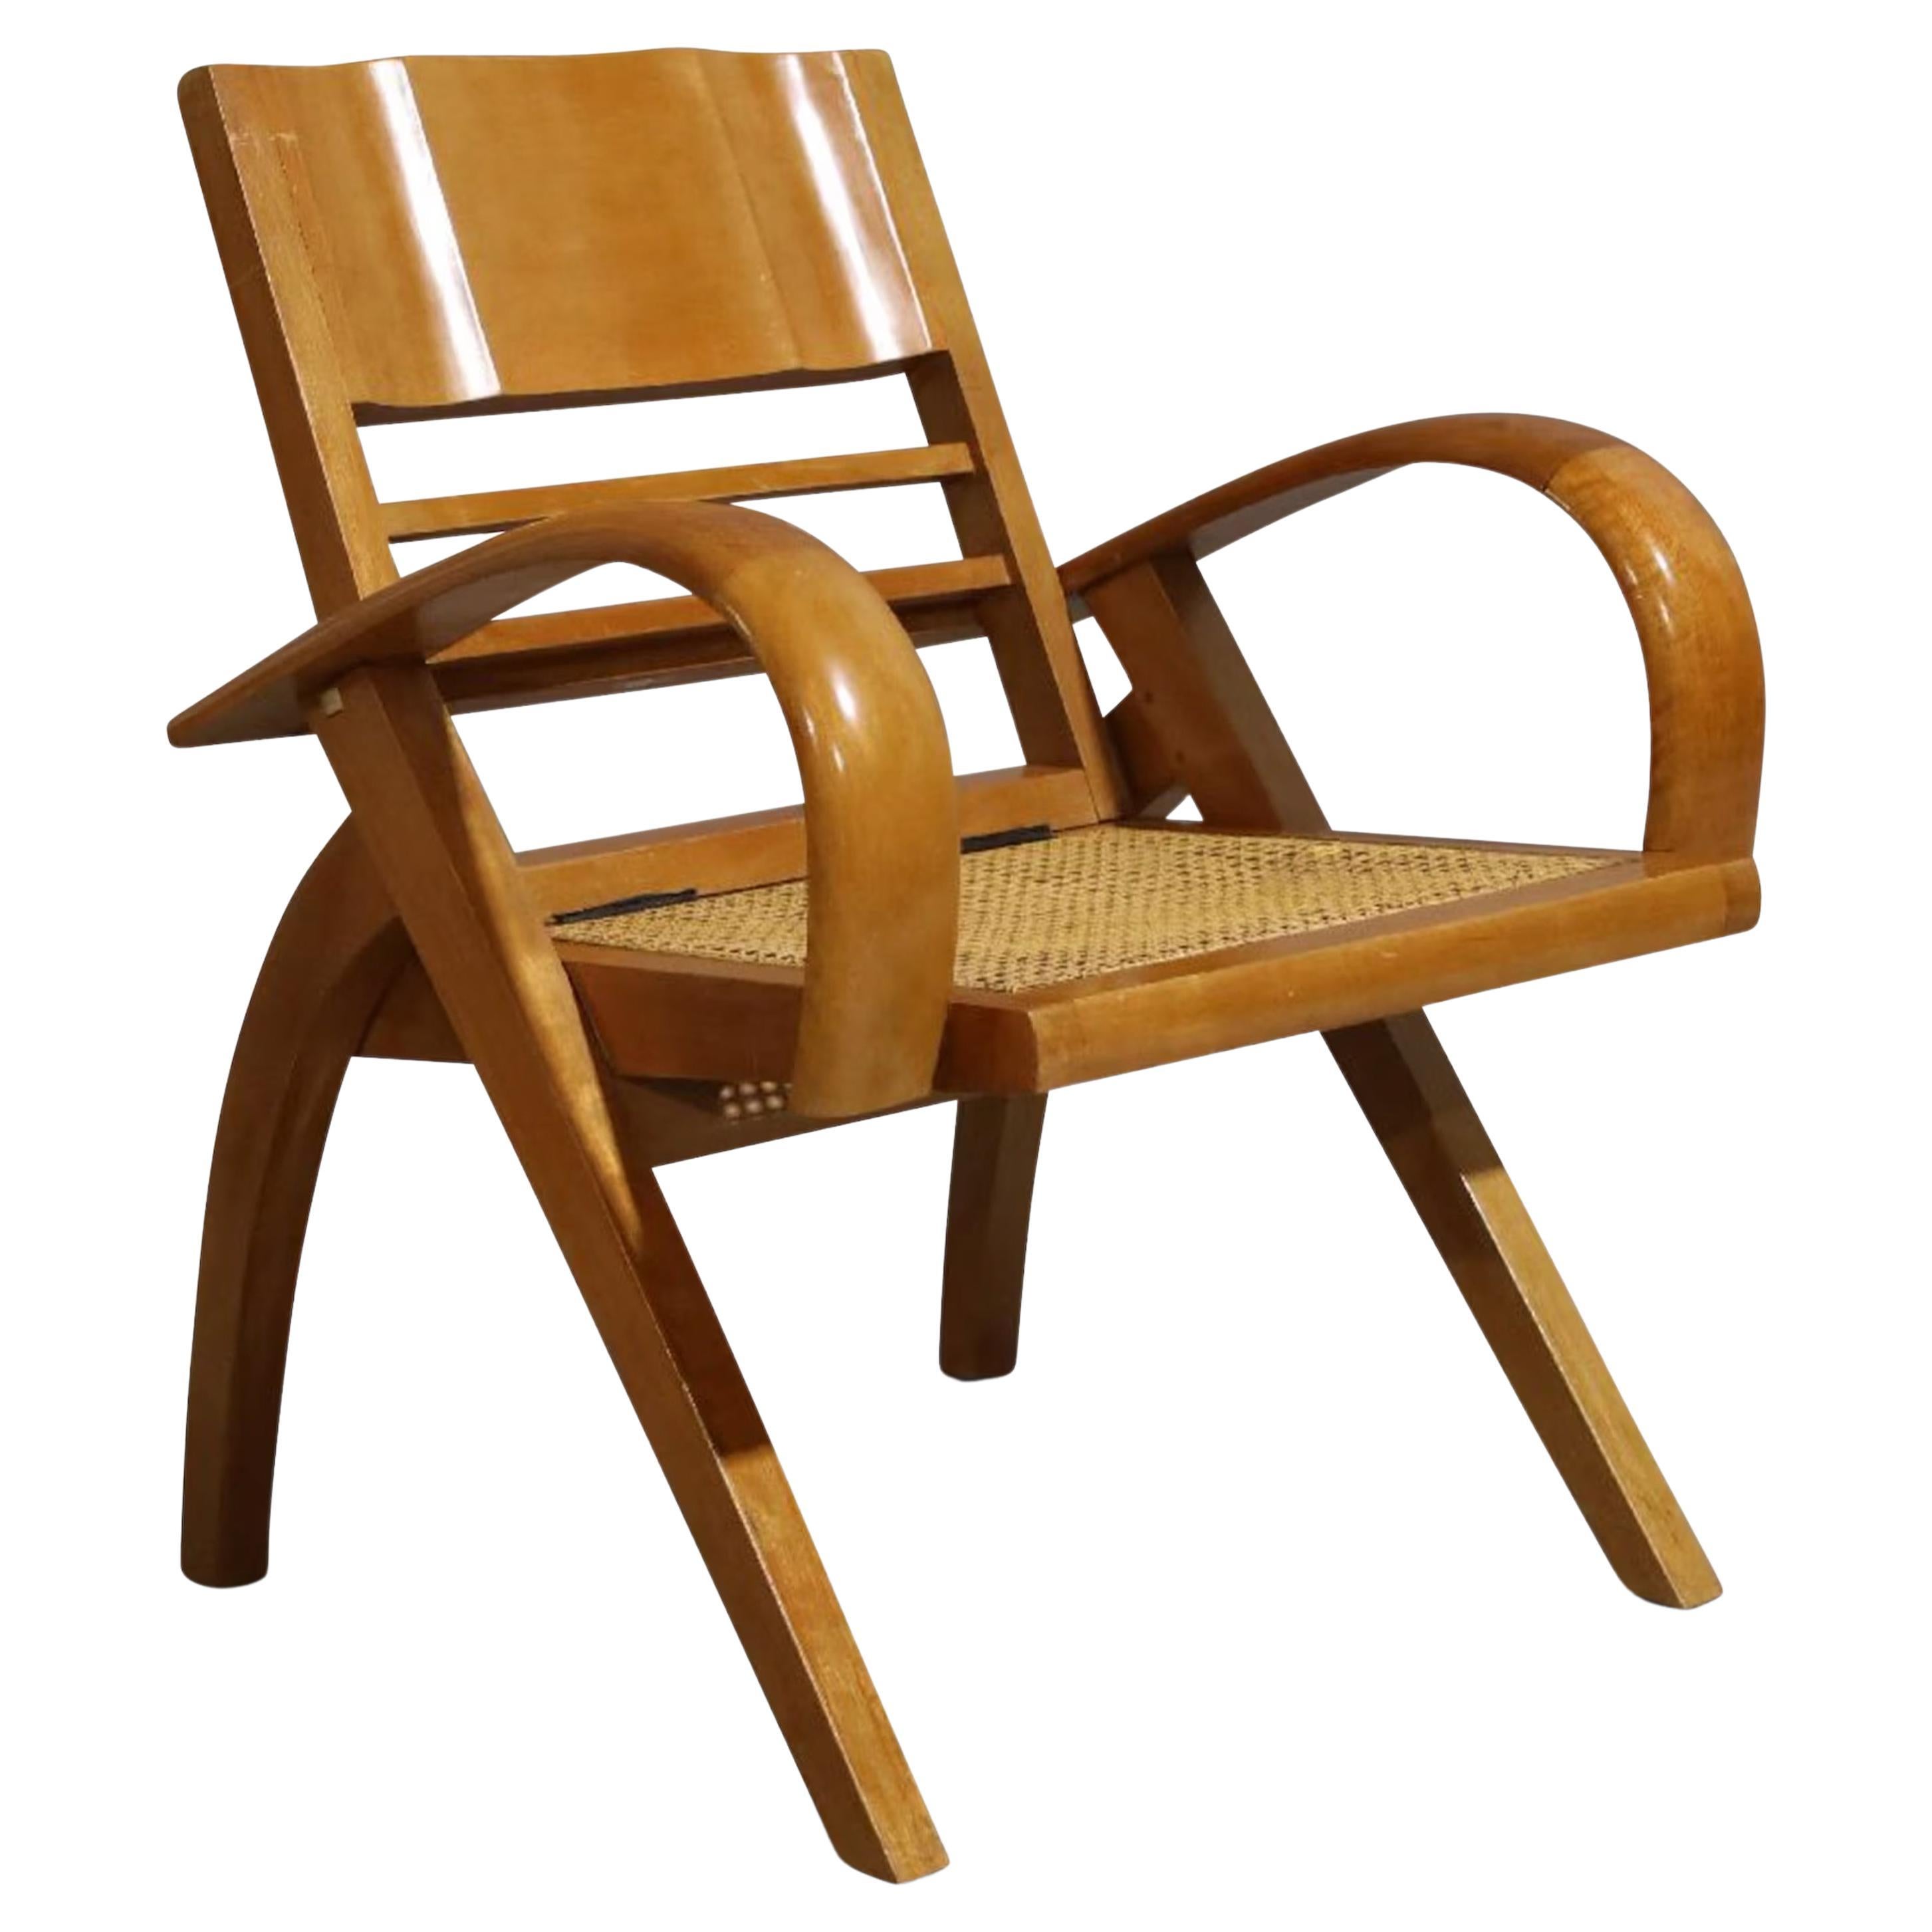 An Early 20th Century French Art Deco Satinwood & Cane Folding Armchair 1920s For Sale